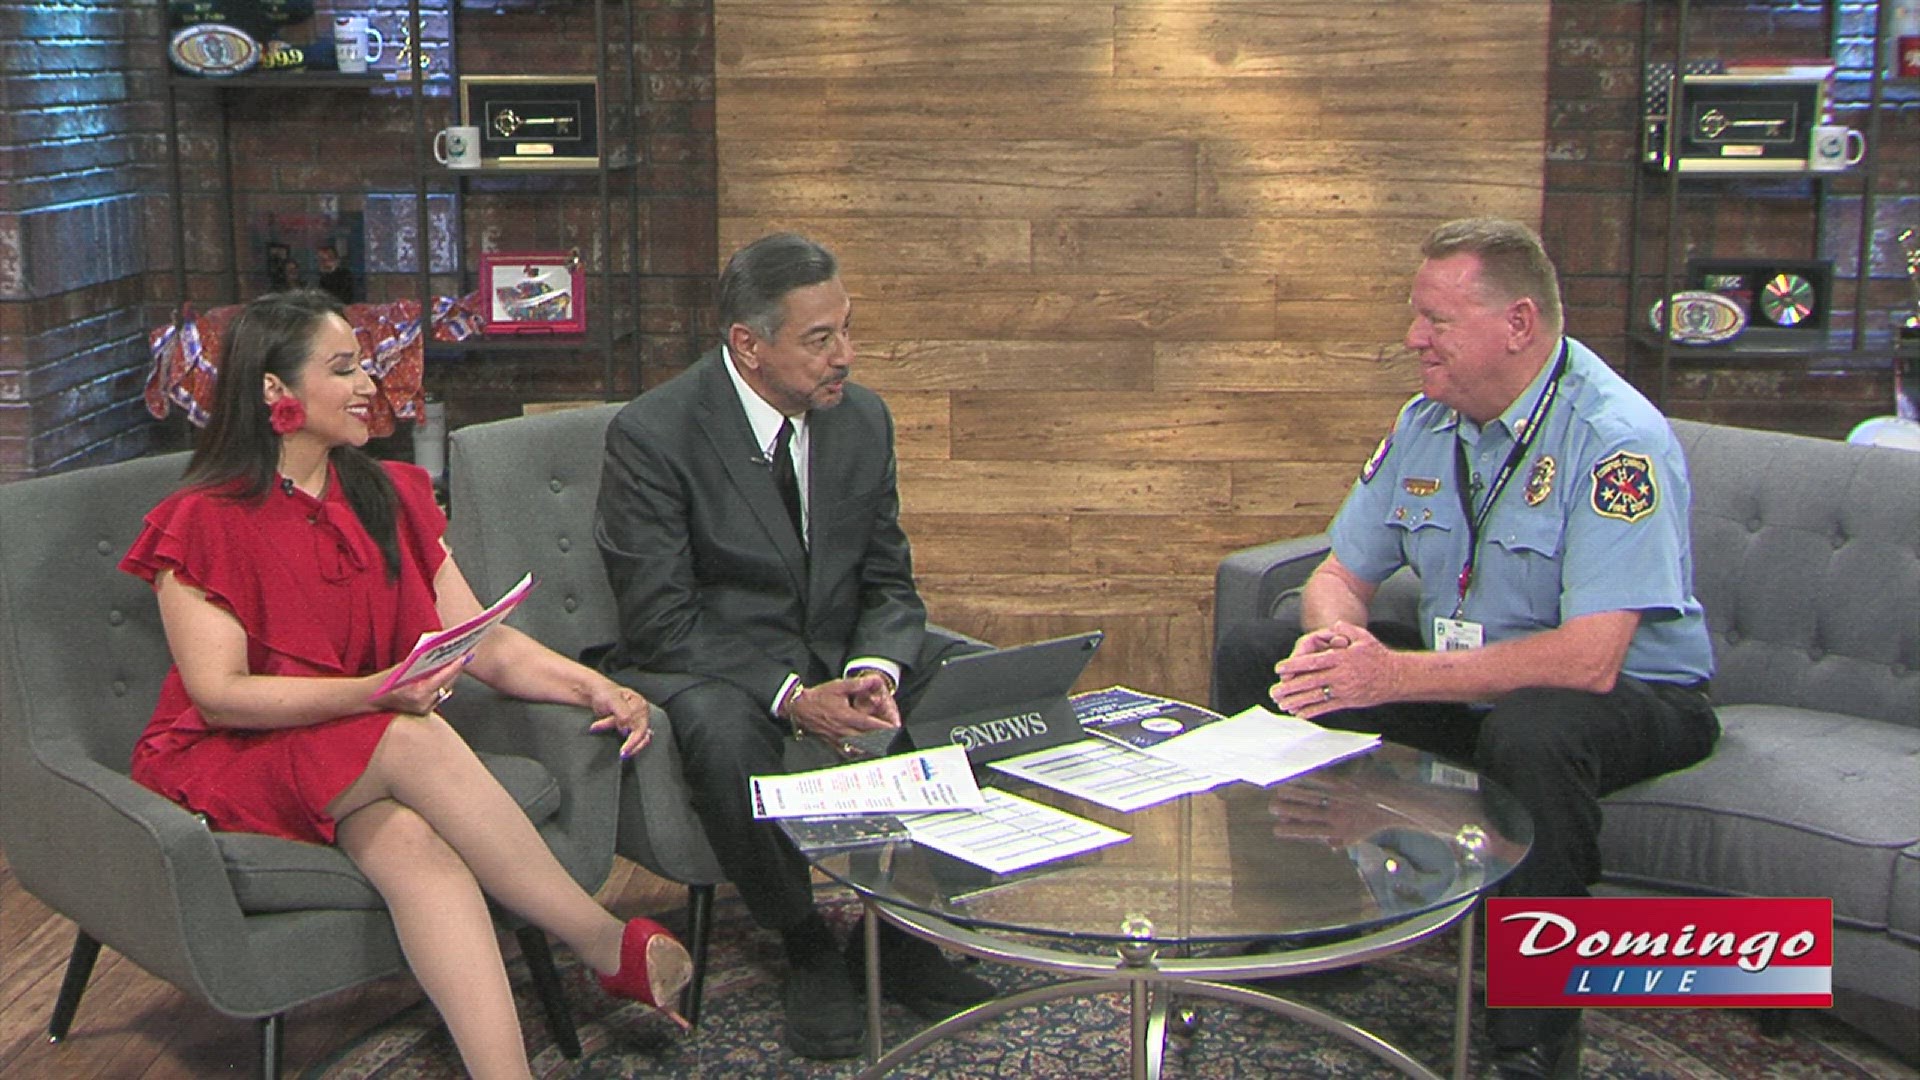 Captain Mark Lewis joined us on Domingo Live to talk about how people can be safe with fireworks this upcoming Independence Day.